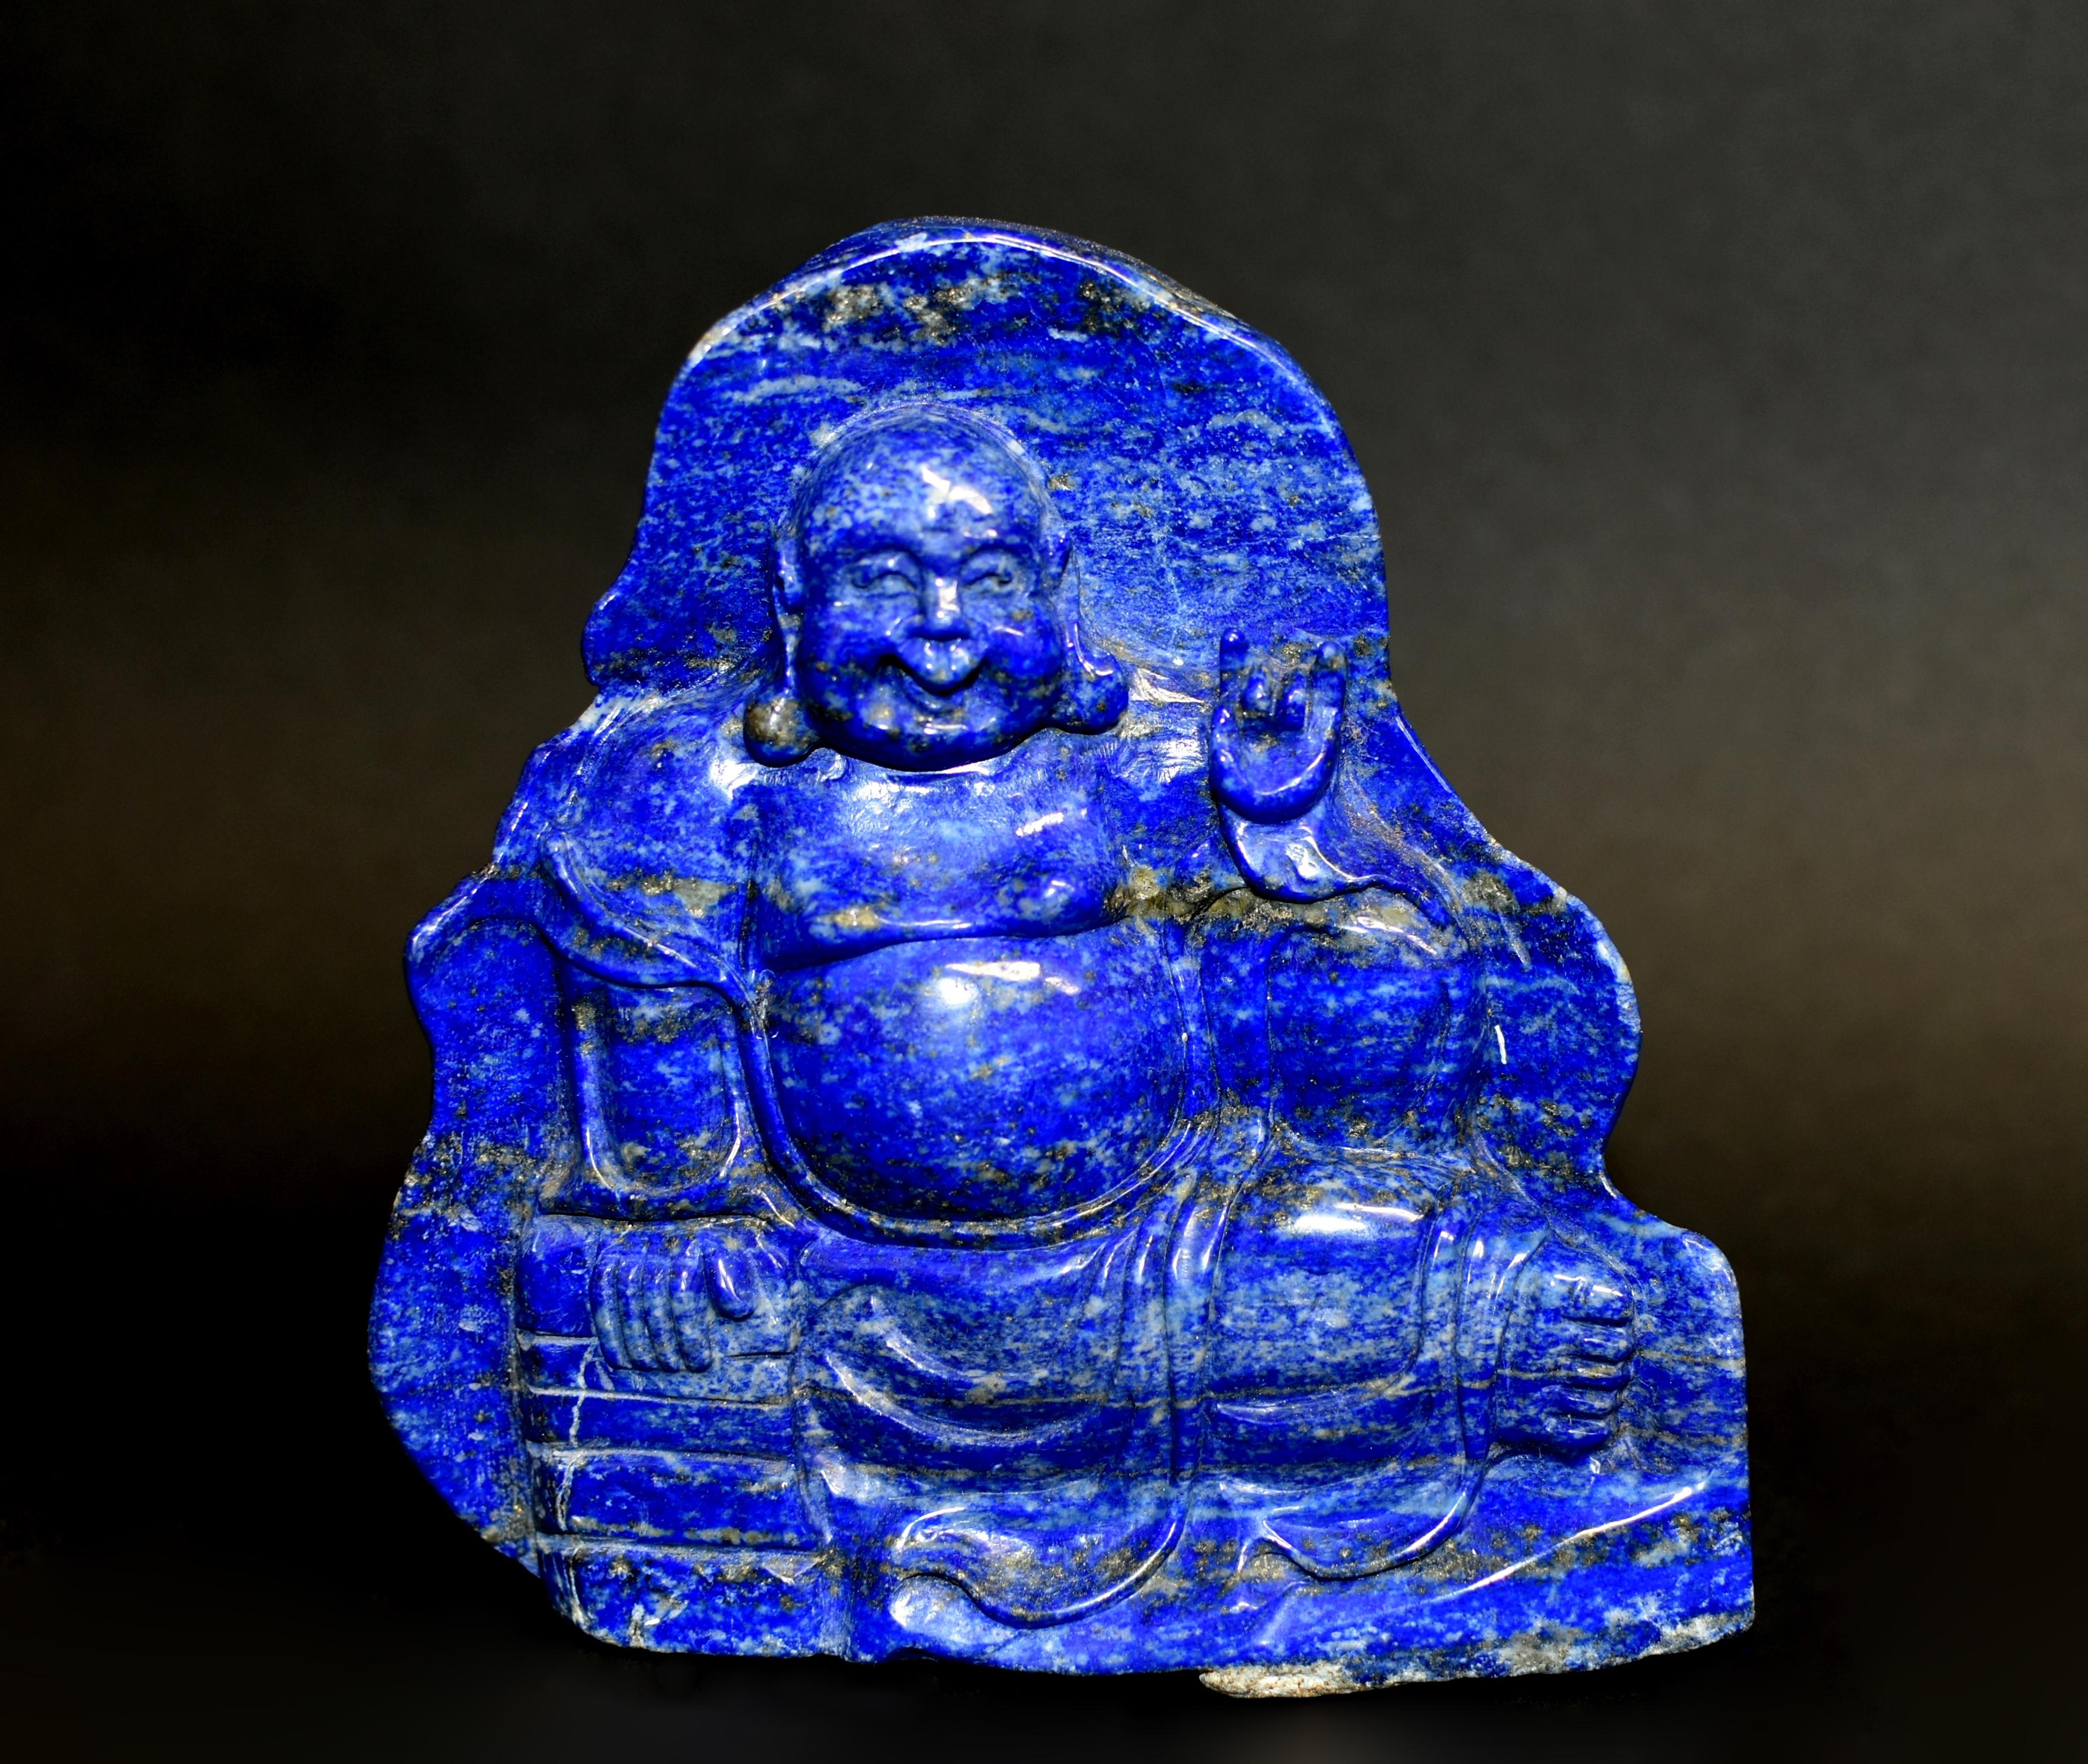 A beautiful natural lapis lazuli statue of the Happy Buddha. The full face with big laughing mouth below smiling eyes flanked by long pendulous earlobes. Buddha wears a loose robe falling gracefully to his legs, revealing his chest and feet. The